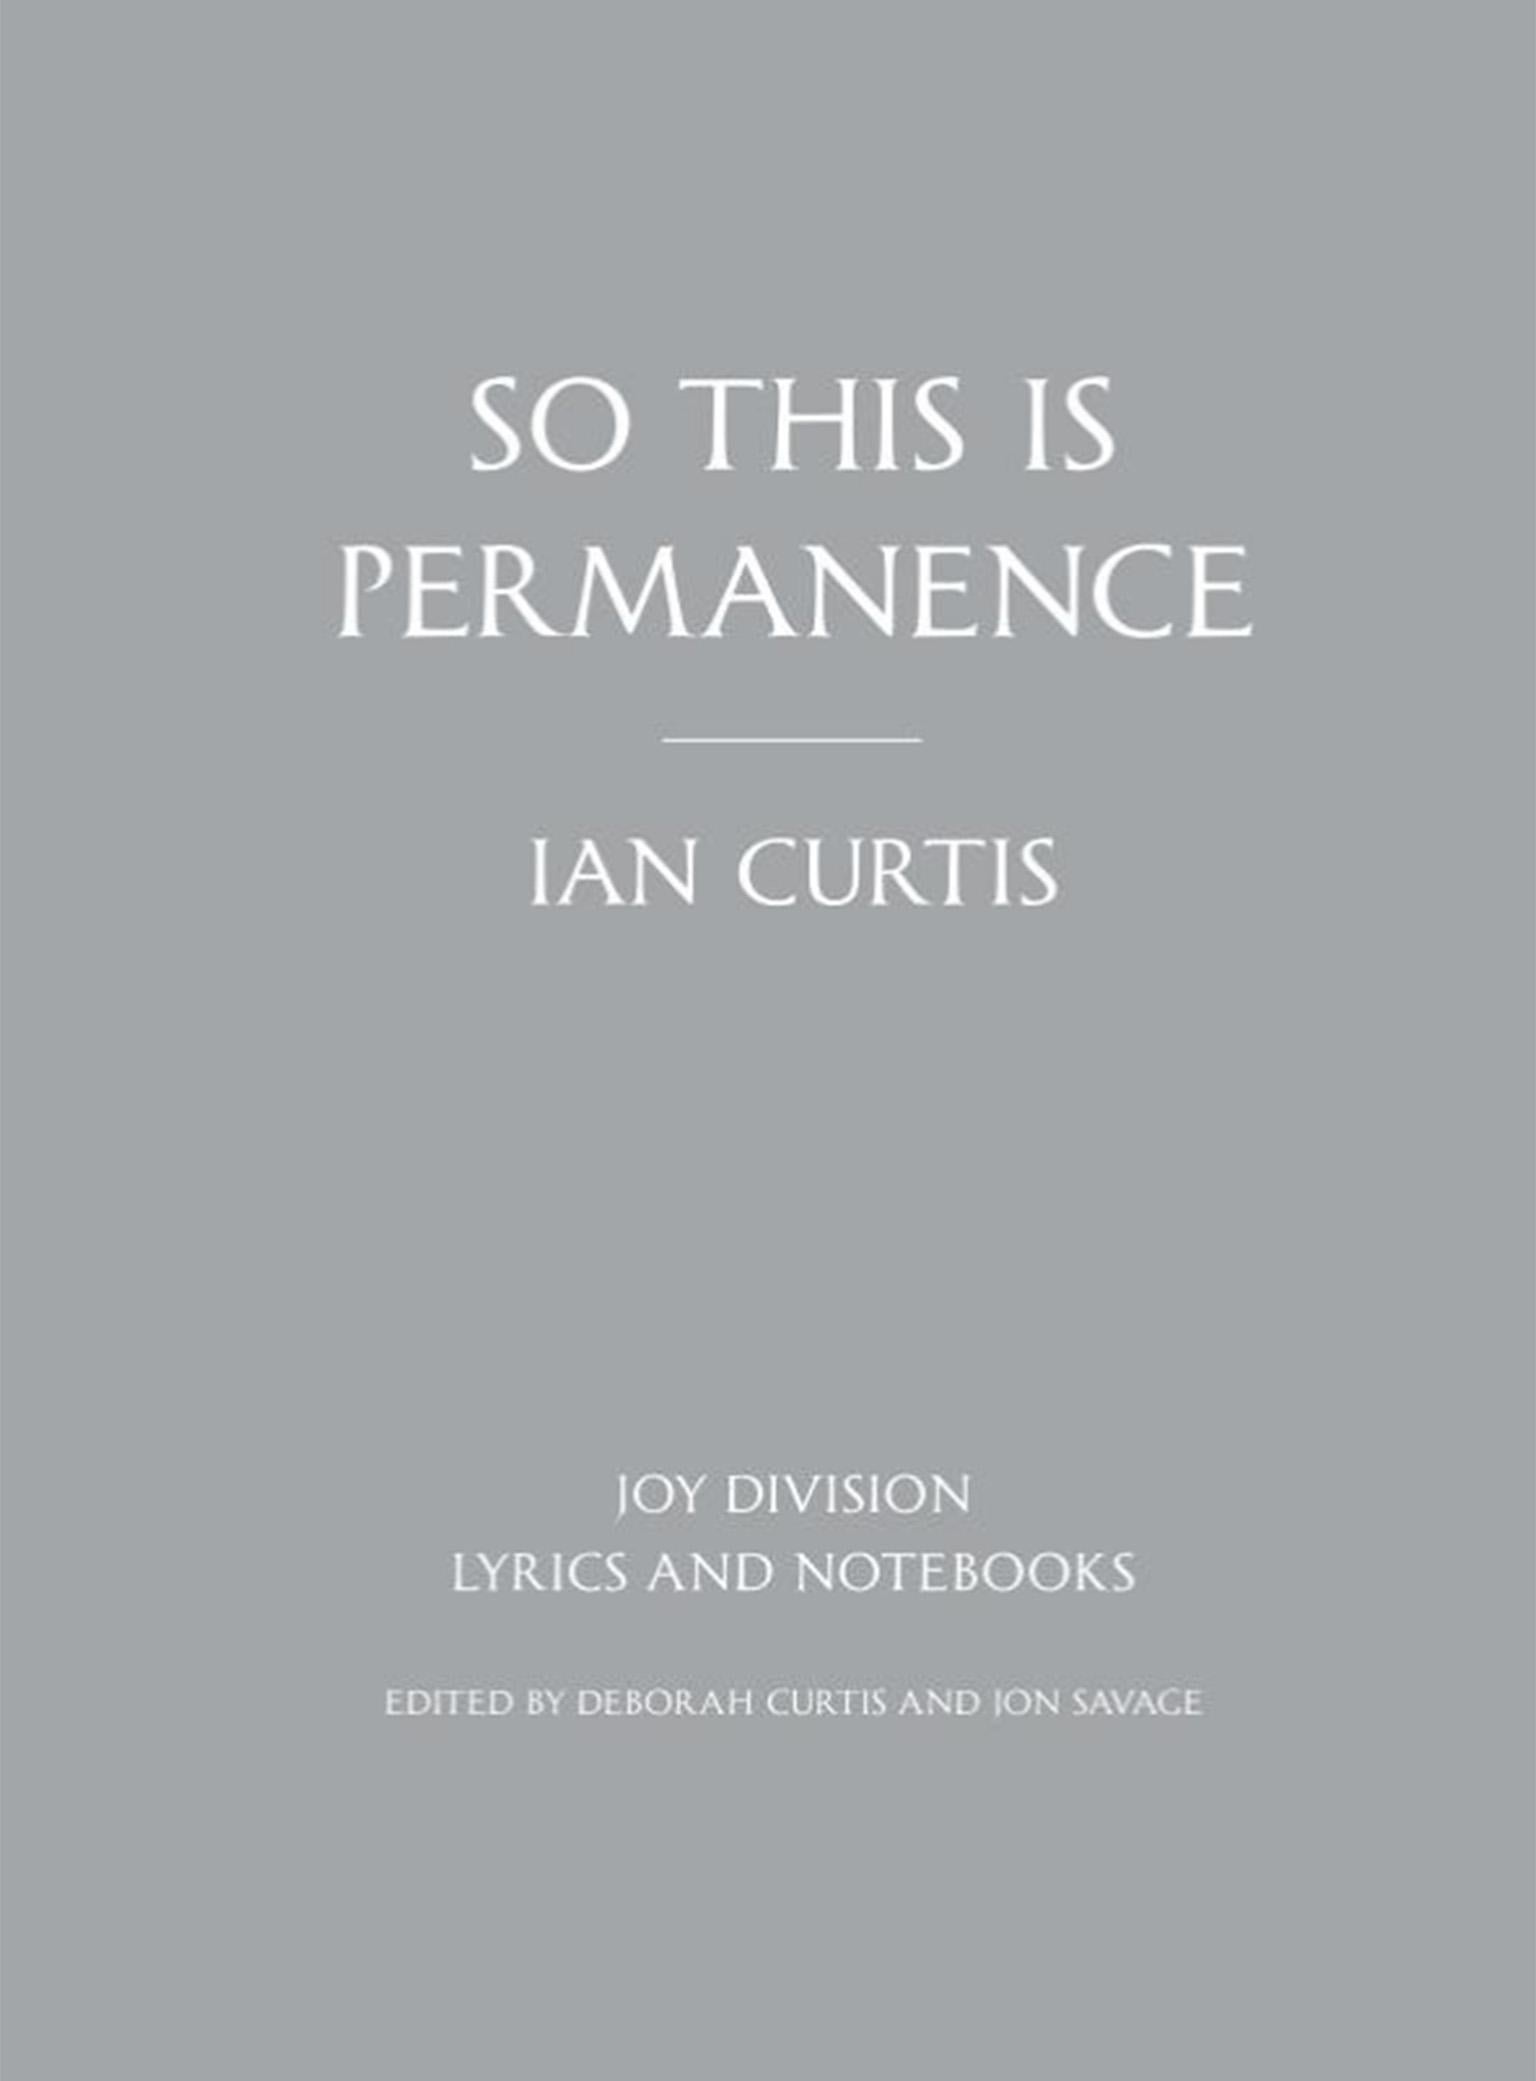 ‘So This is Permanence: Joy Division Lyrics and Notebooks’ by Ian Curtis